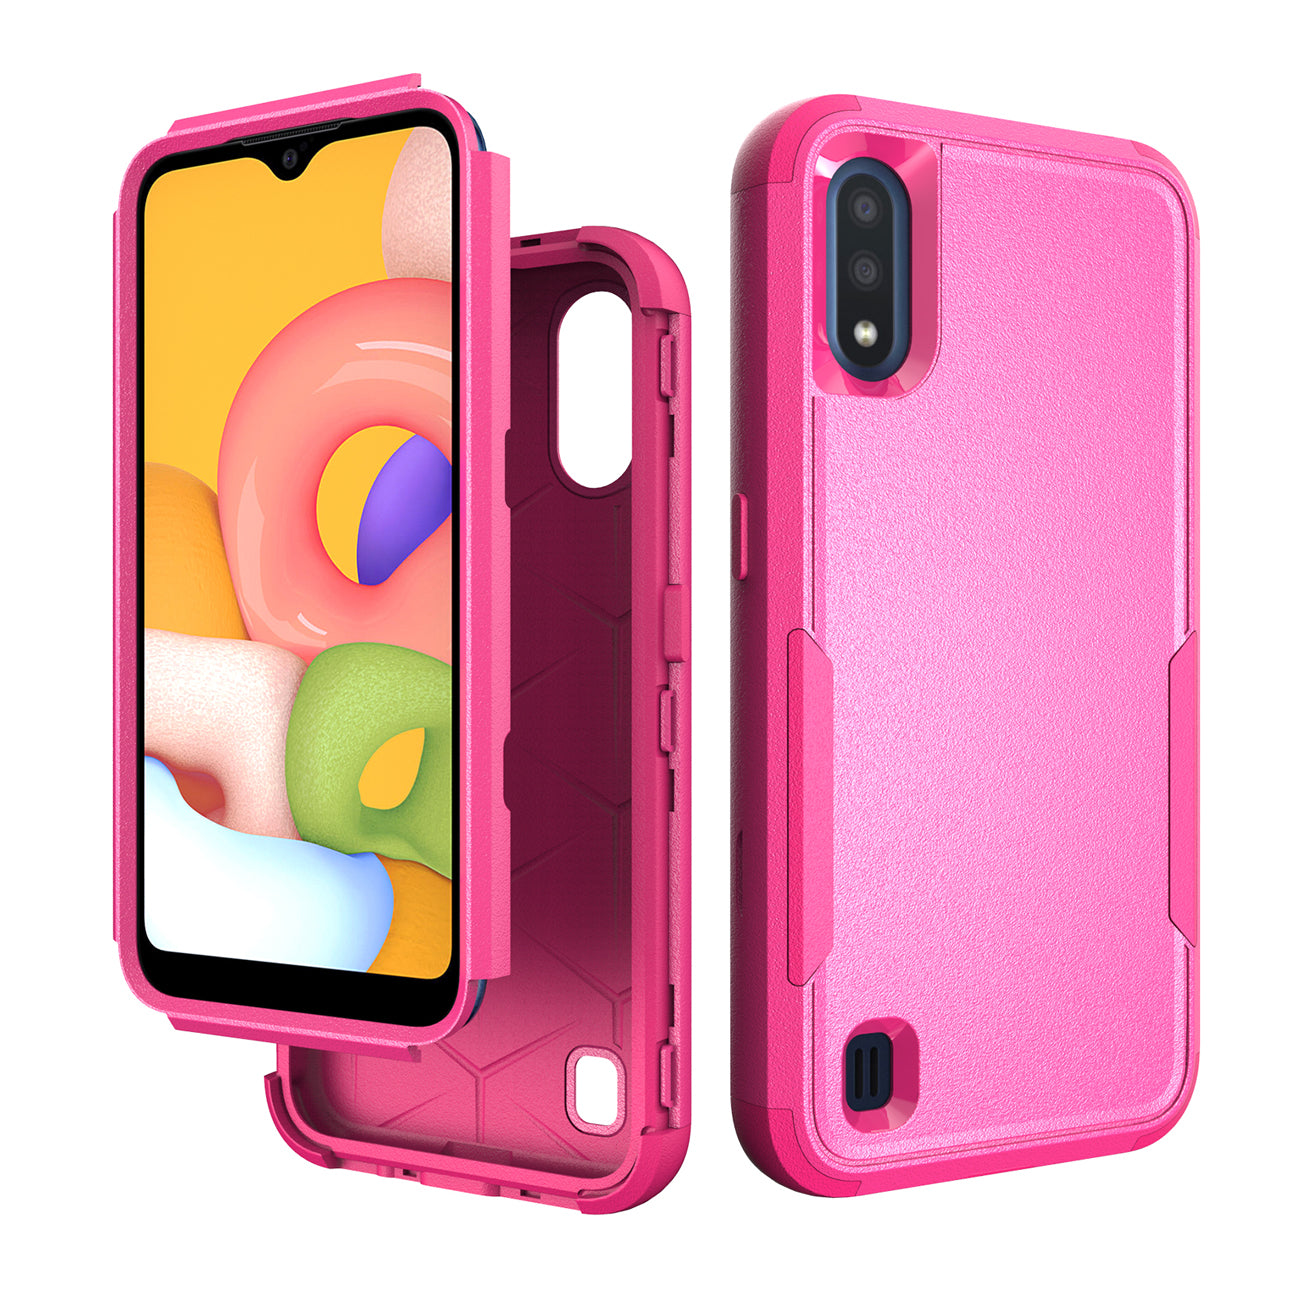 3in1 Hybrid Heavy Duty Defender Rugged Armor Military Grade Case For SAMSUNG GALAXY A01 In Hot pink